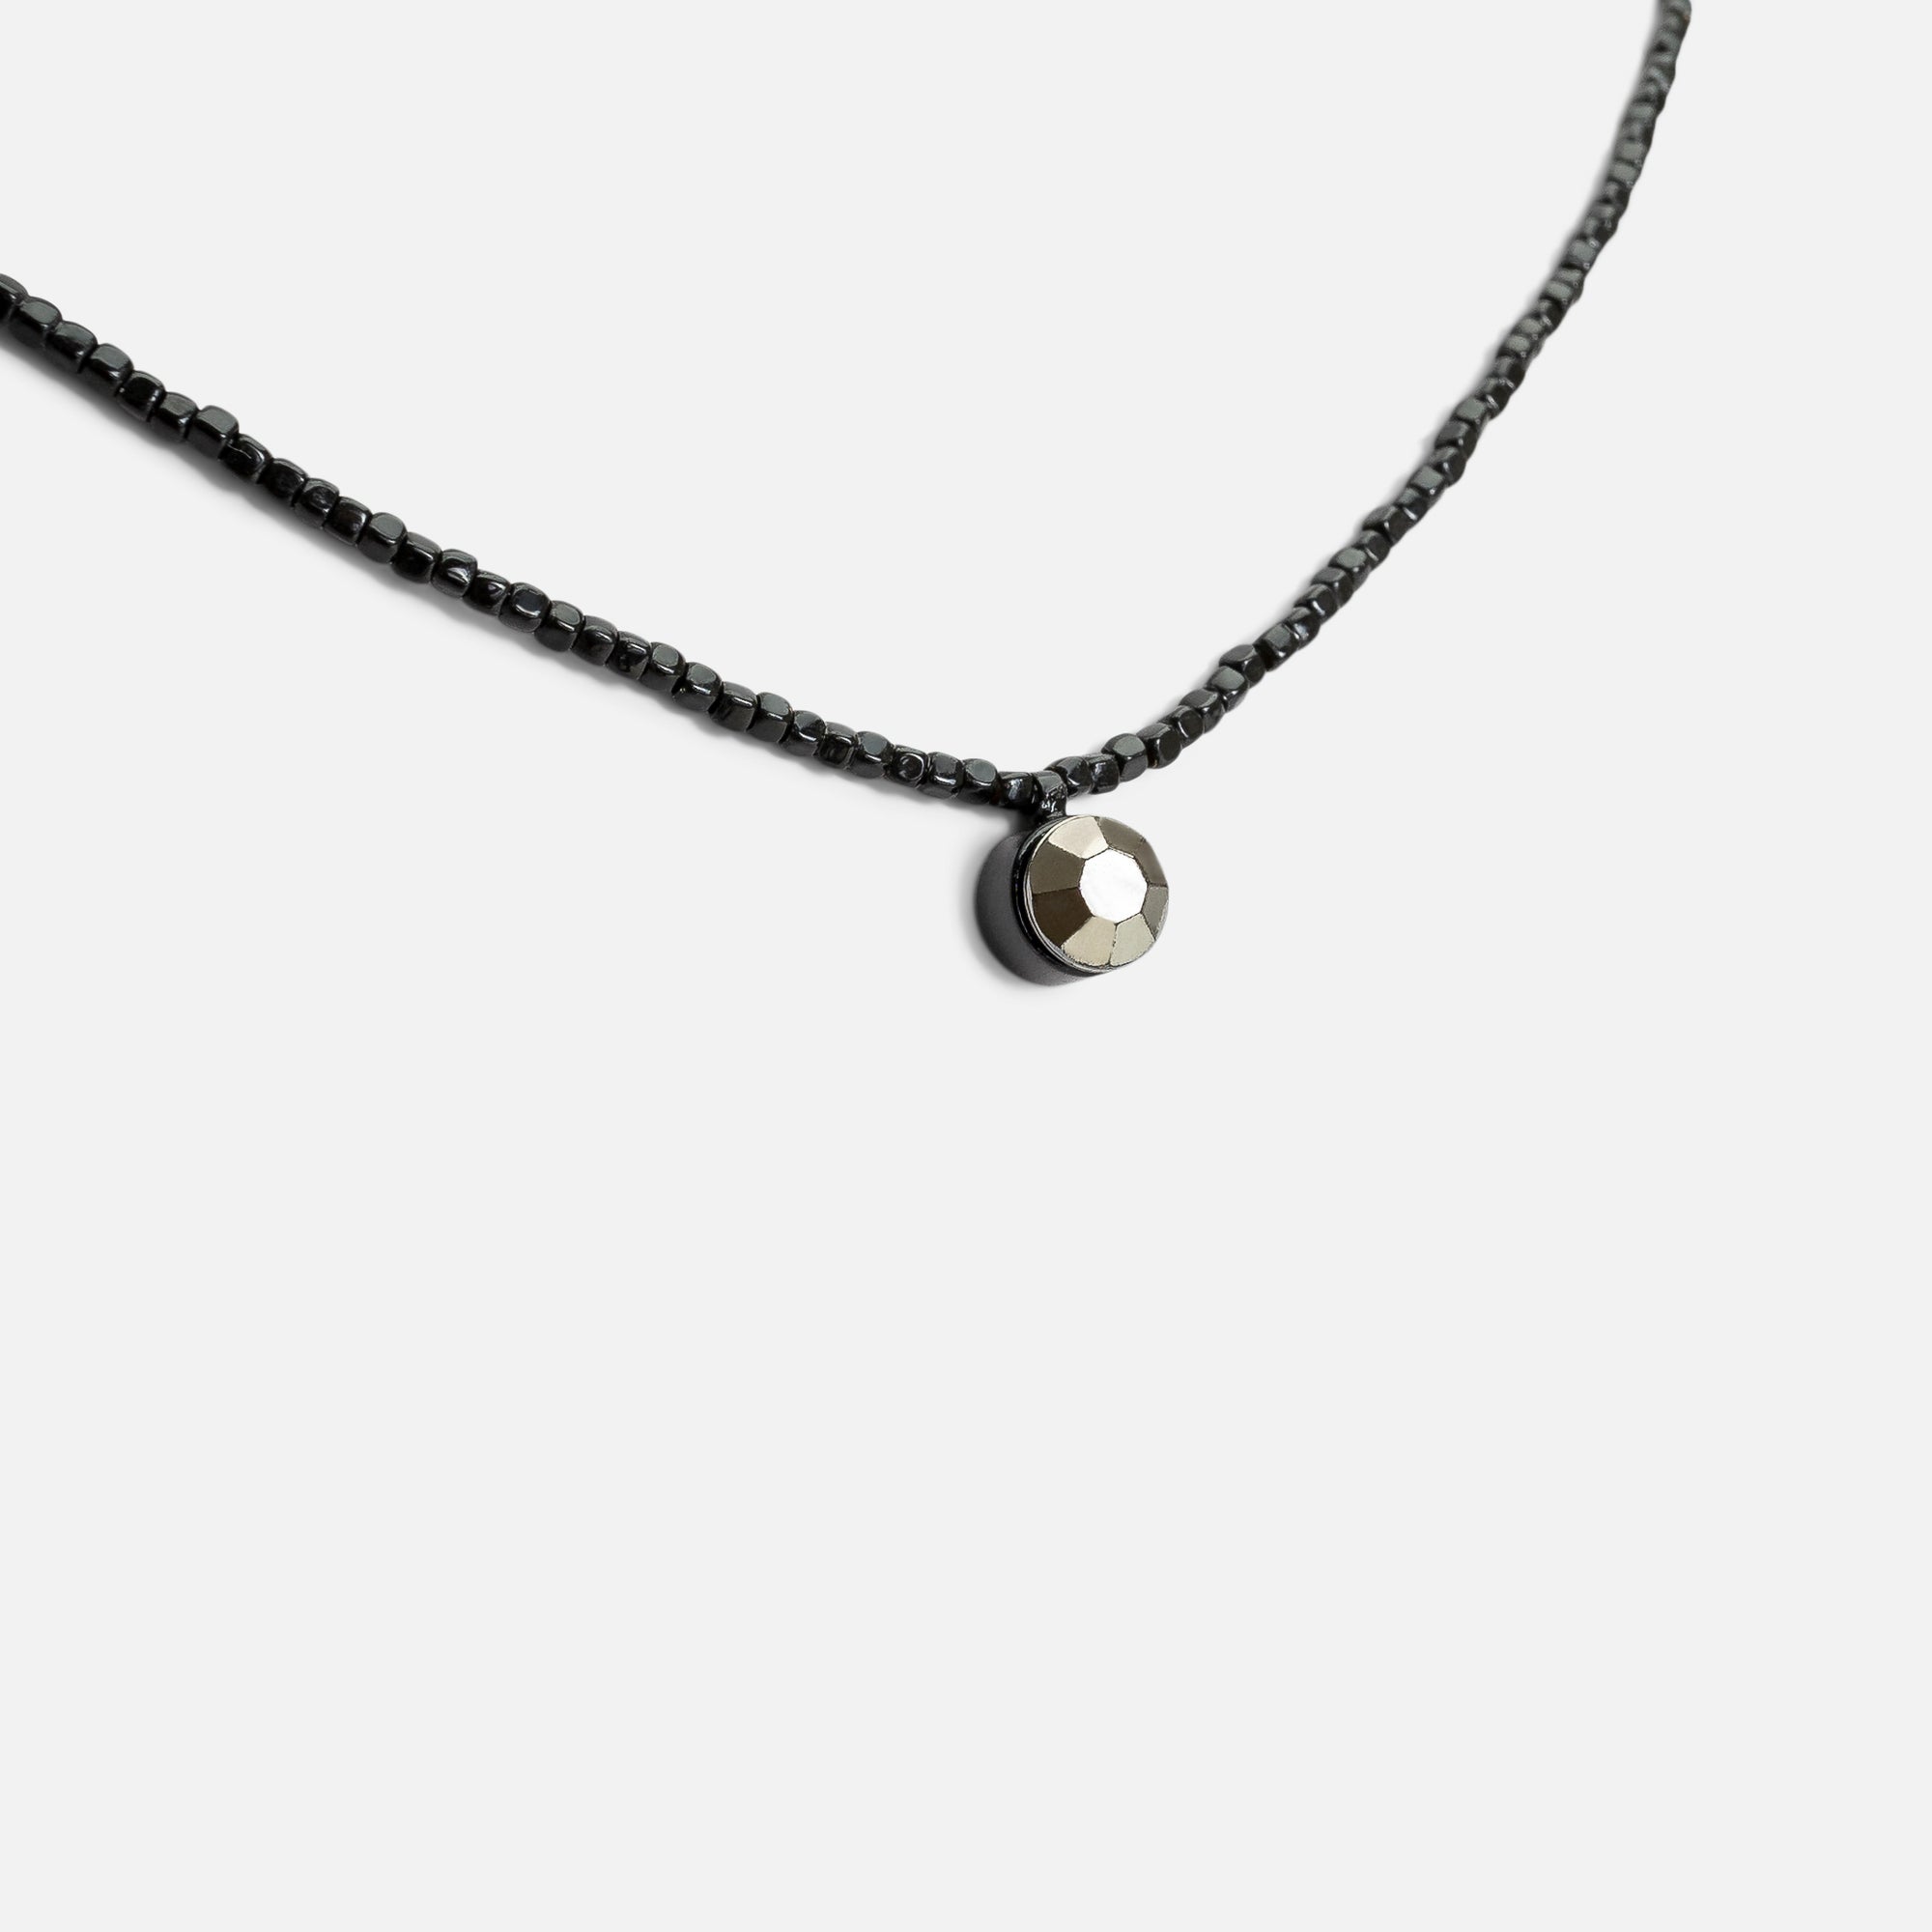 Short black bead necklace with pendant